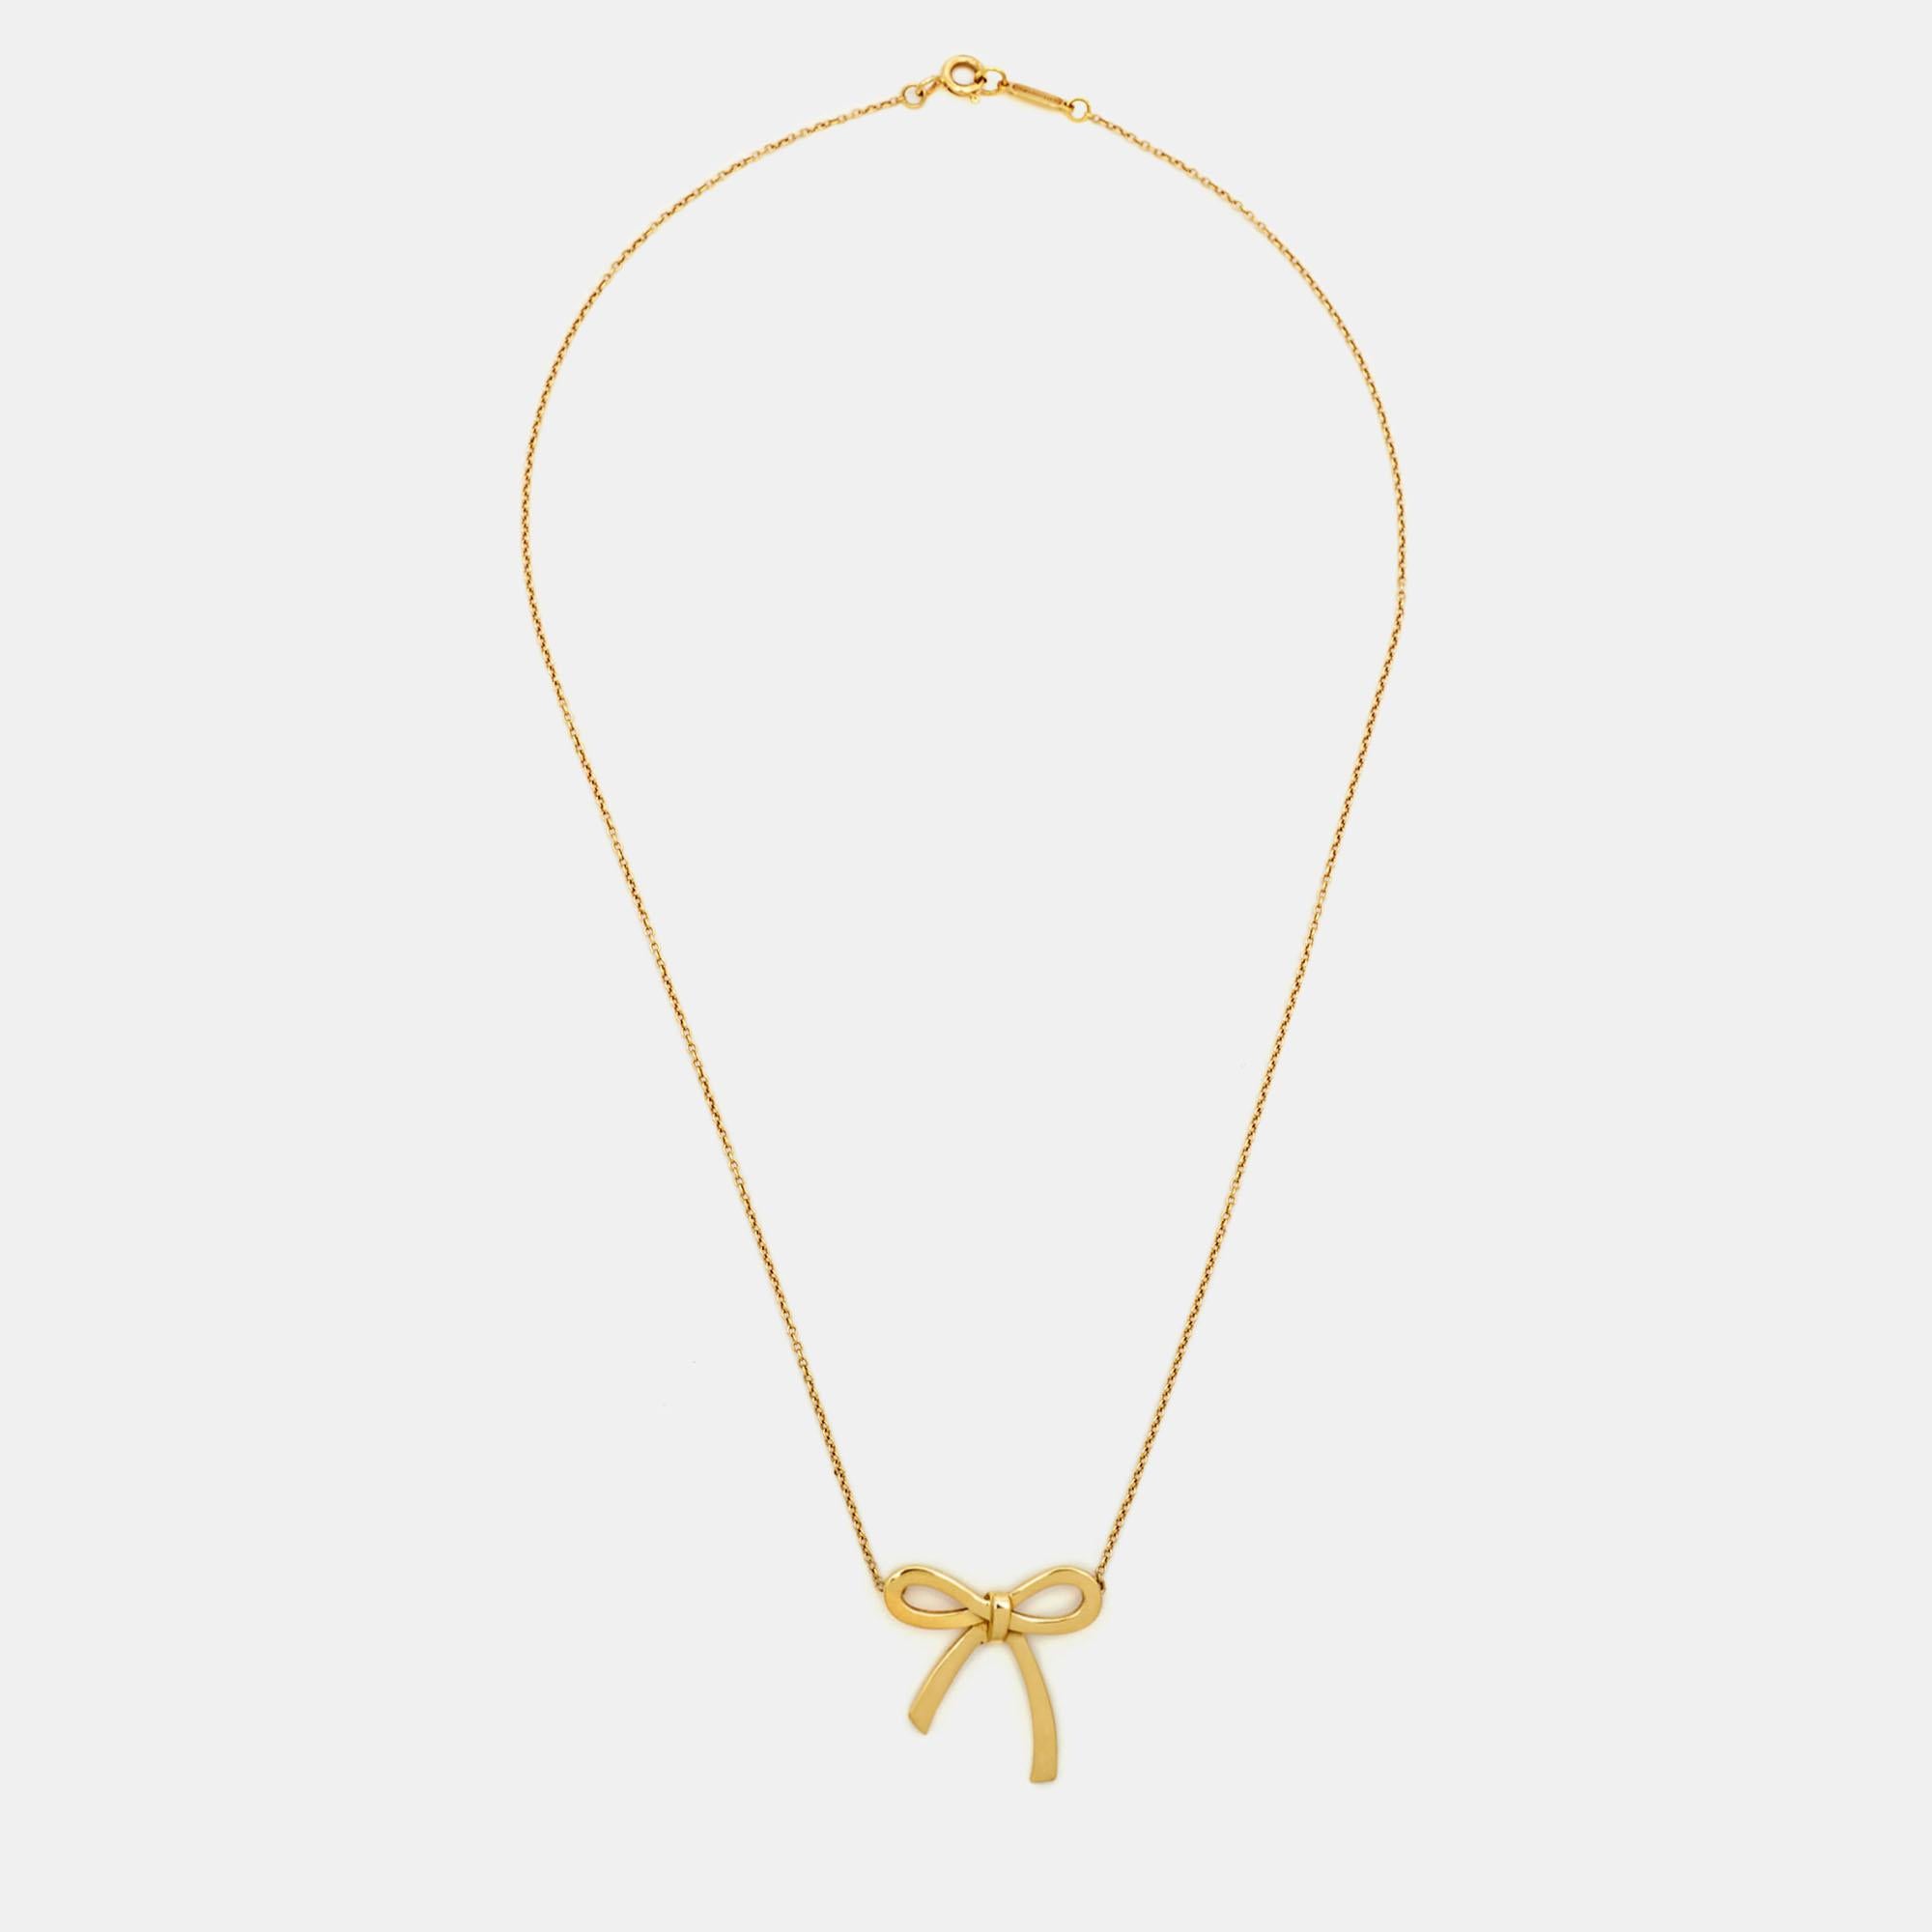 The Tiffany & Co. necklace is an exquisite piece of jewelry that combines elegance and sophistication. Crafted from luxurious 18k yellow gold, the necklace features a delicate bow pendant, symbolizing femininity and grace. This timeless accessory